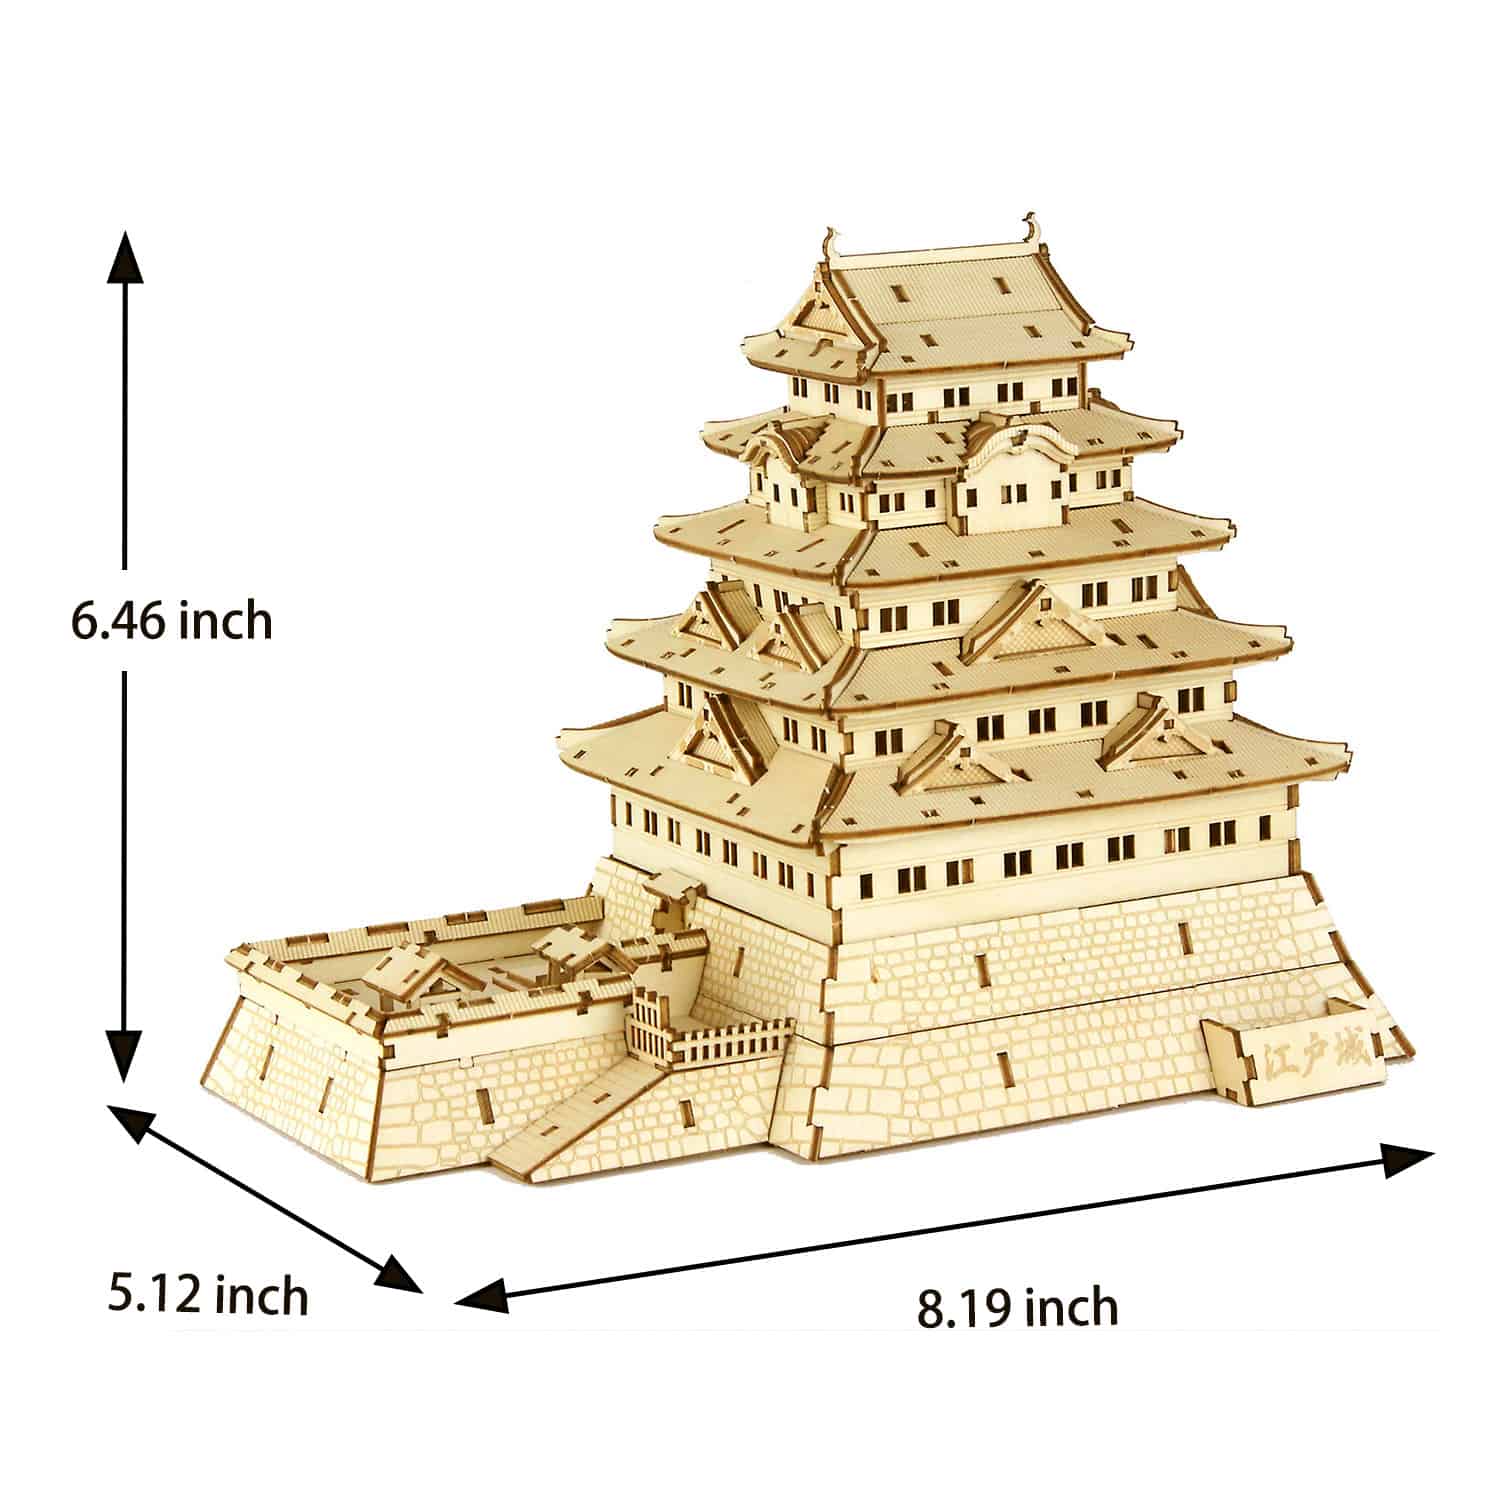 WAGUMI Himeji Castle Wooden 3D Puzzle - Magnote Gifts